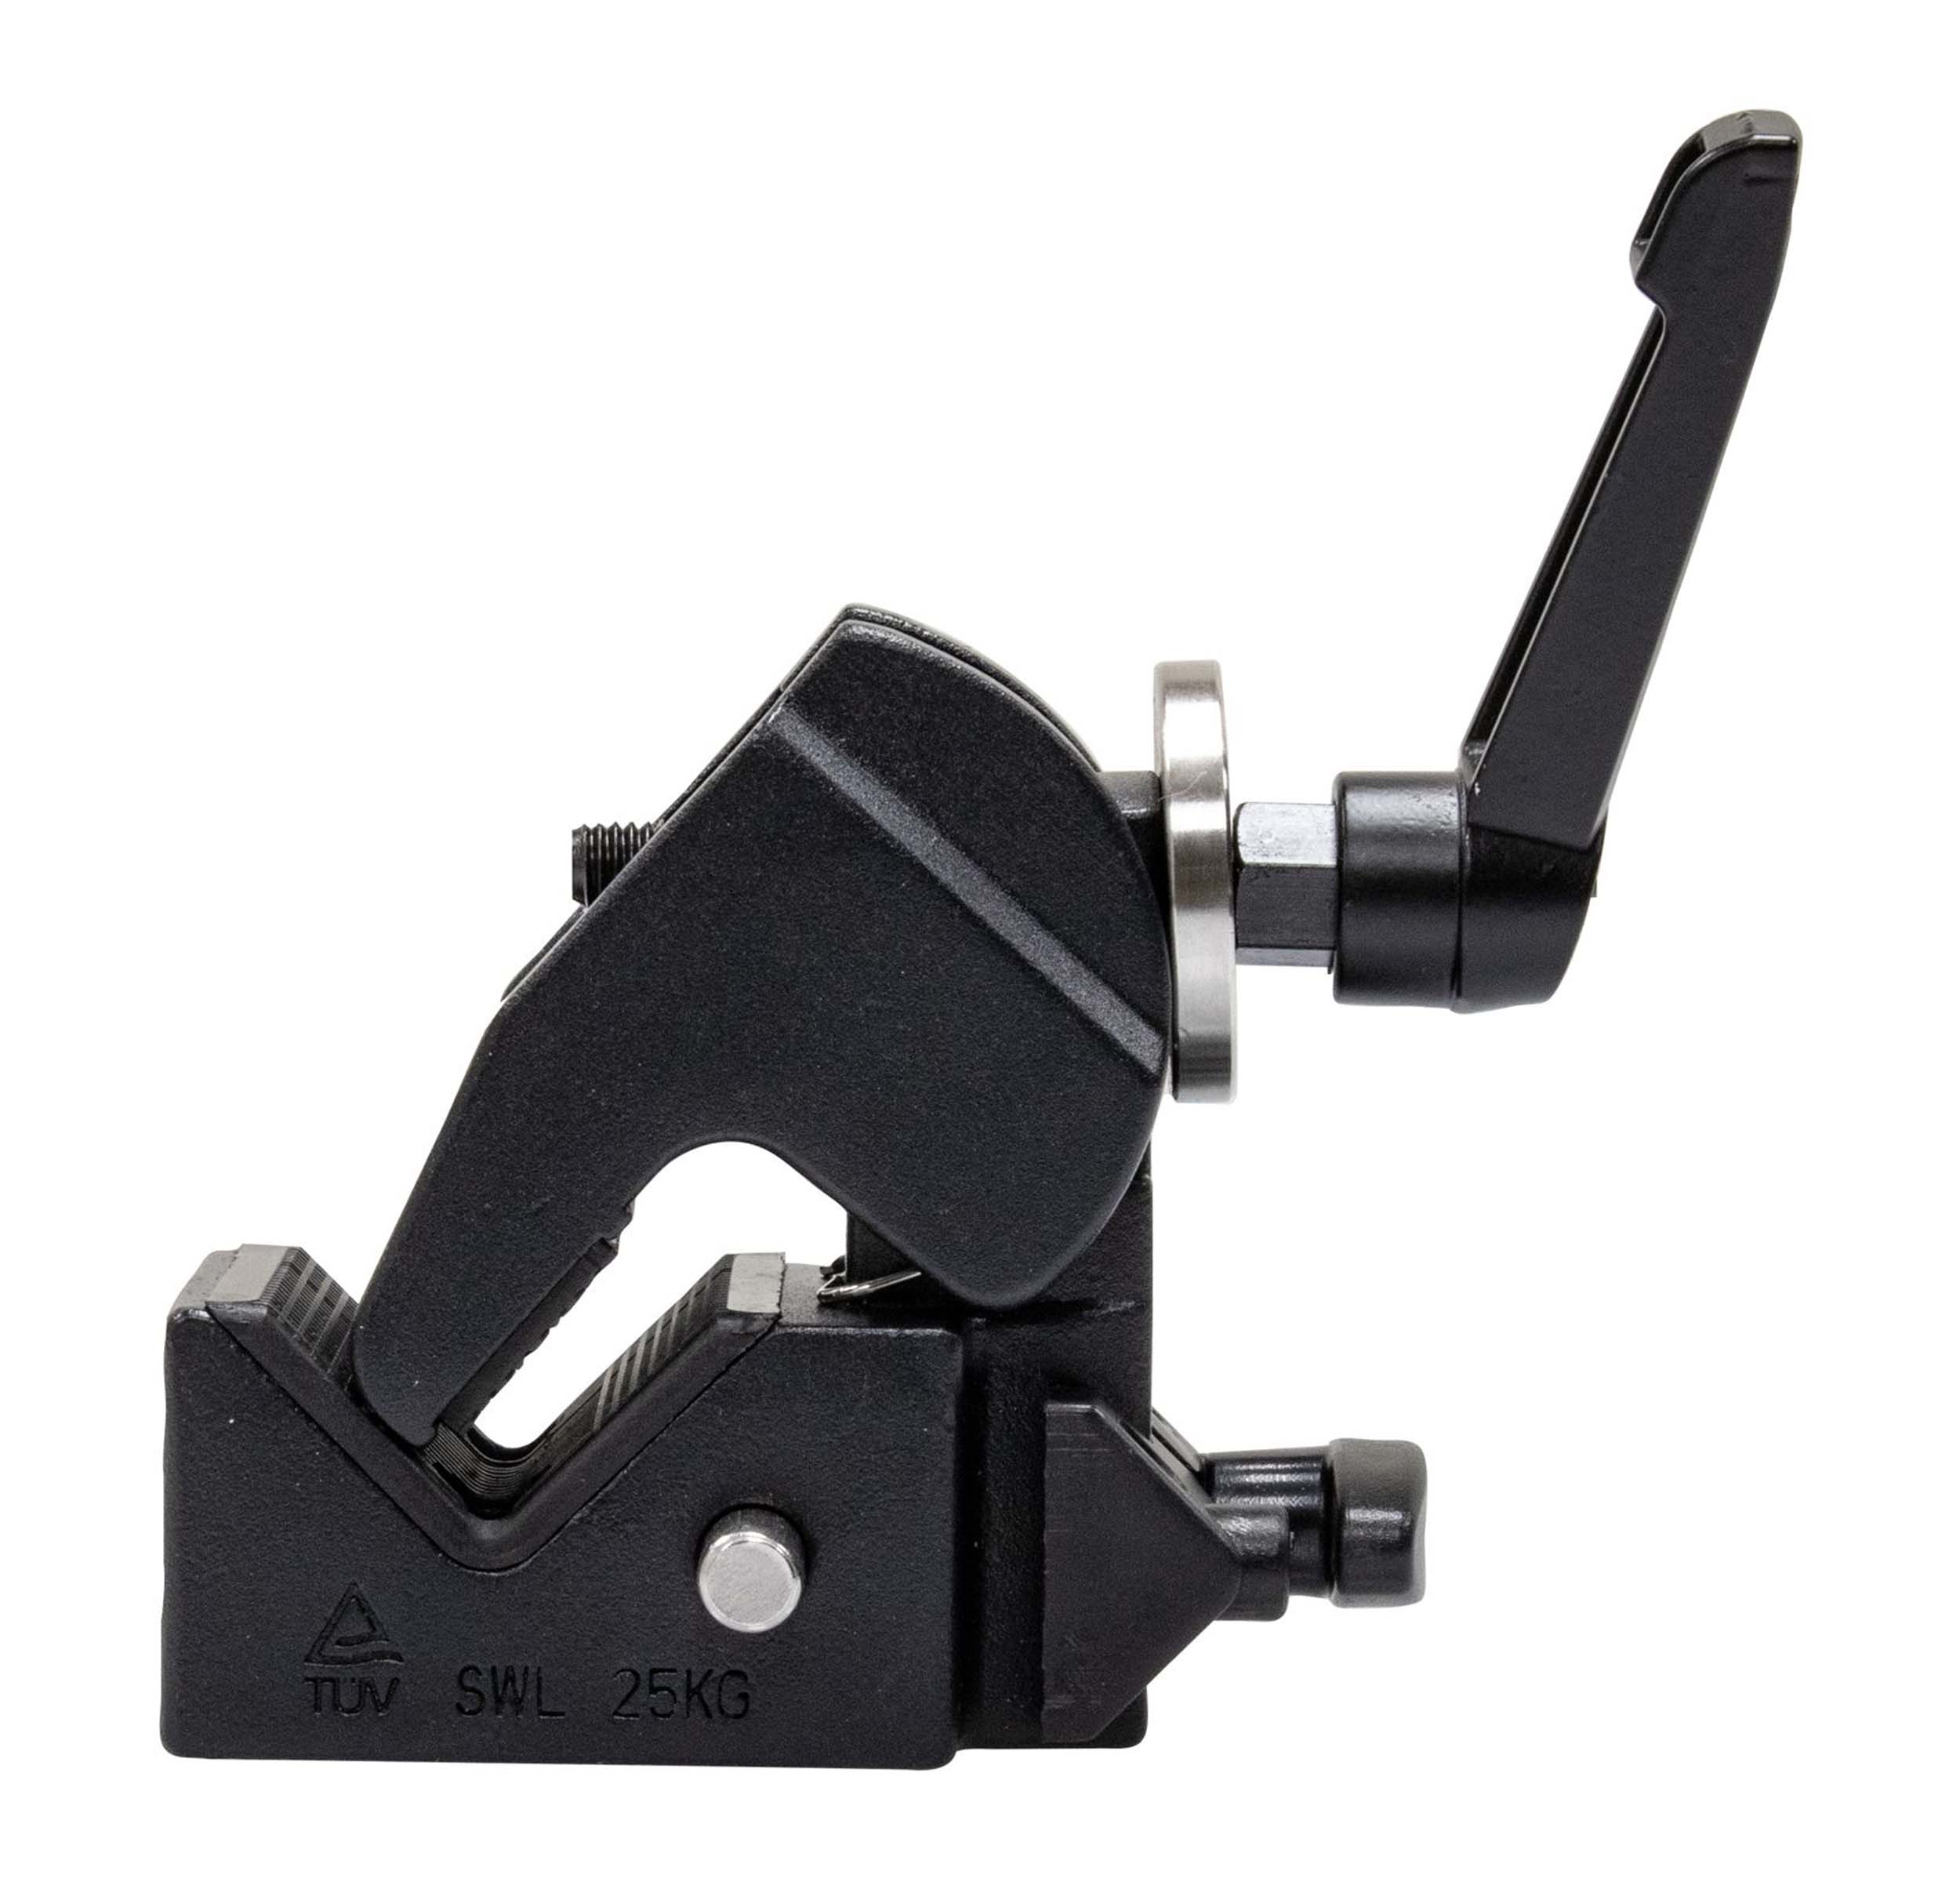 Odyssey LACSUPERCLAMP, 55 lbs Load Super Clamp for 2-Inch Tubes - Black by Odyssey